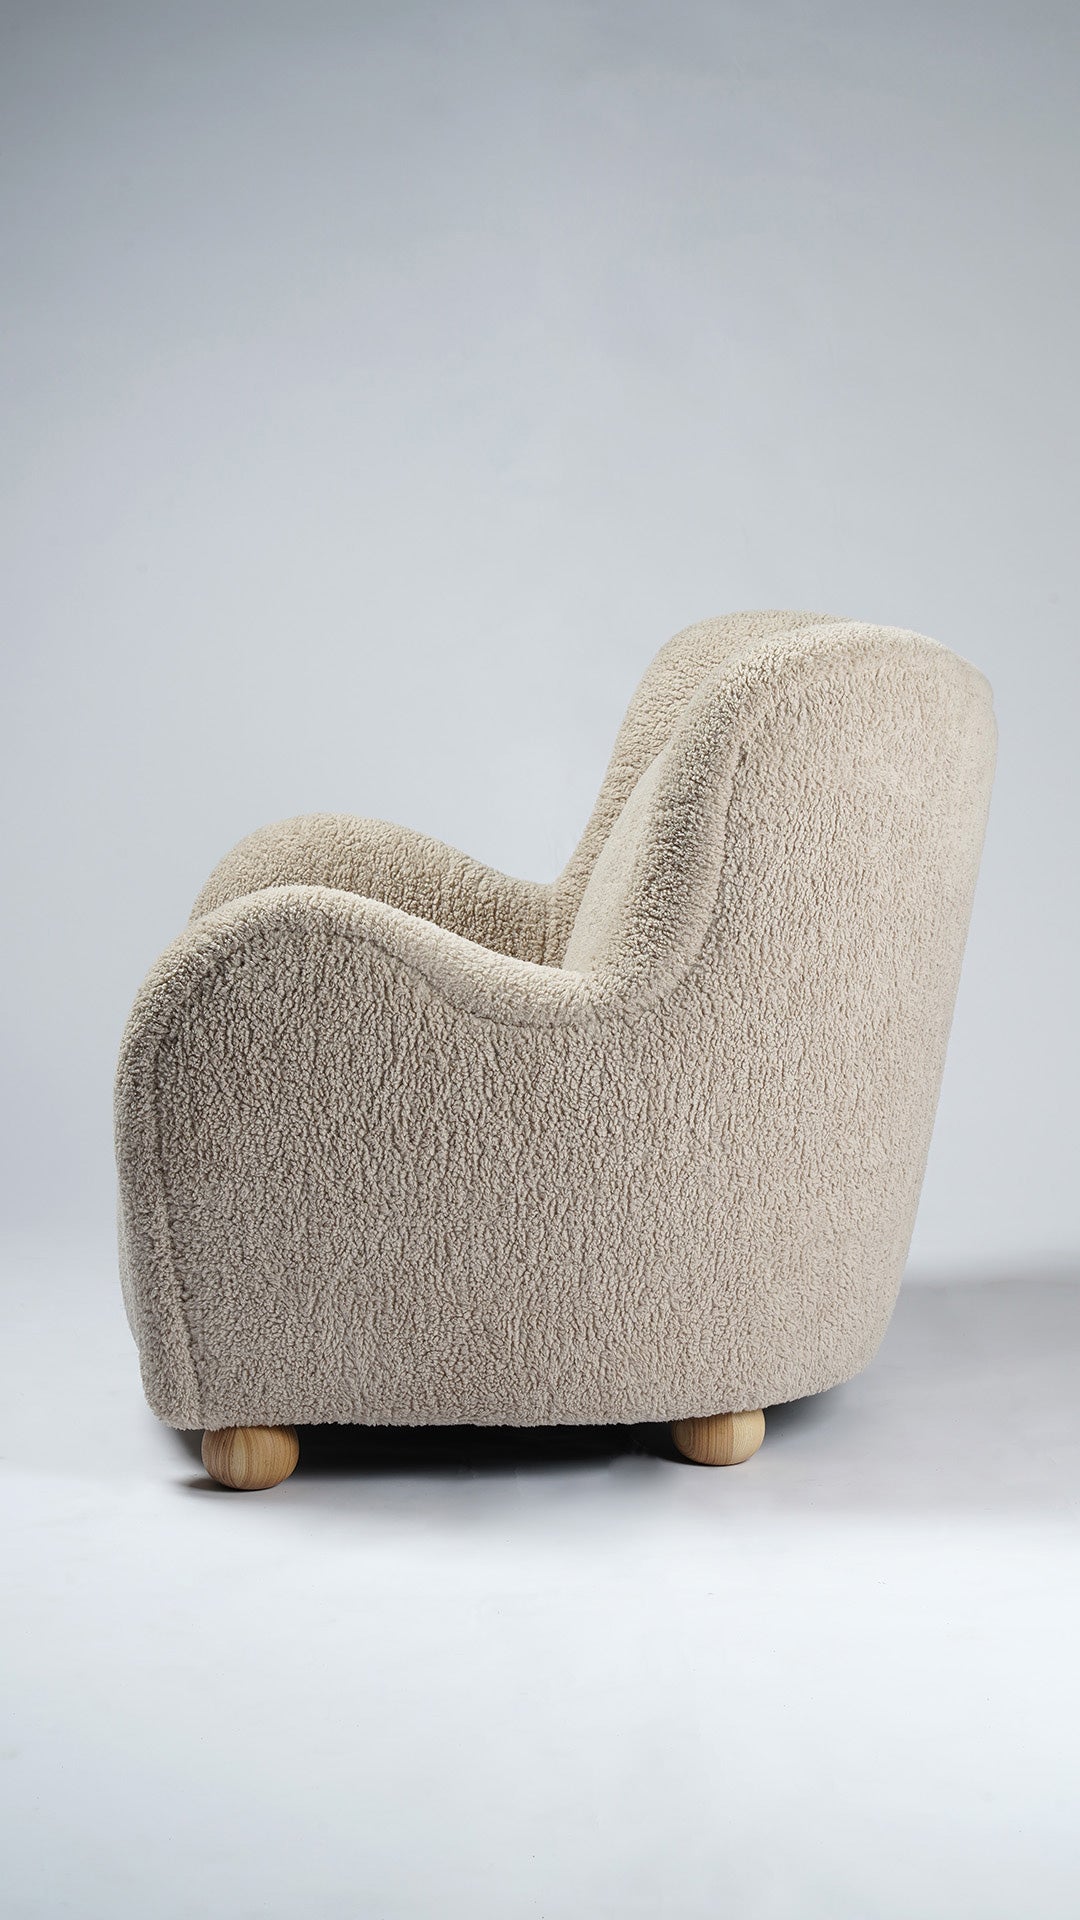 Murih Armchair - Wood and Steel Furnitures